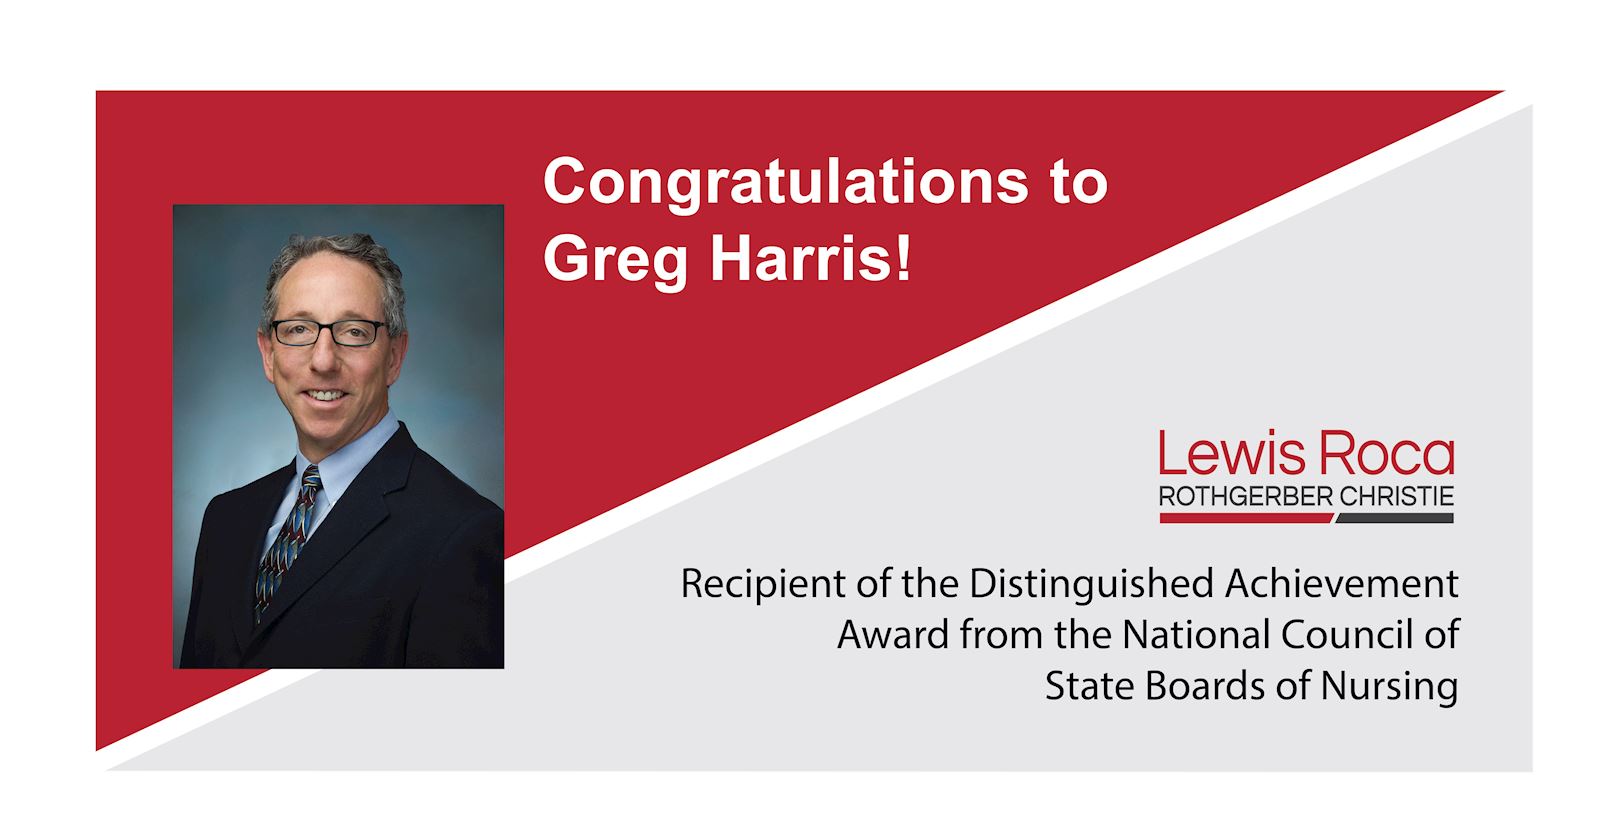 Congratulations to Greg Harris recipient of the Distinguished Achievement Award